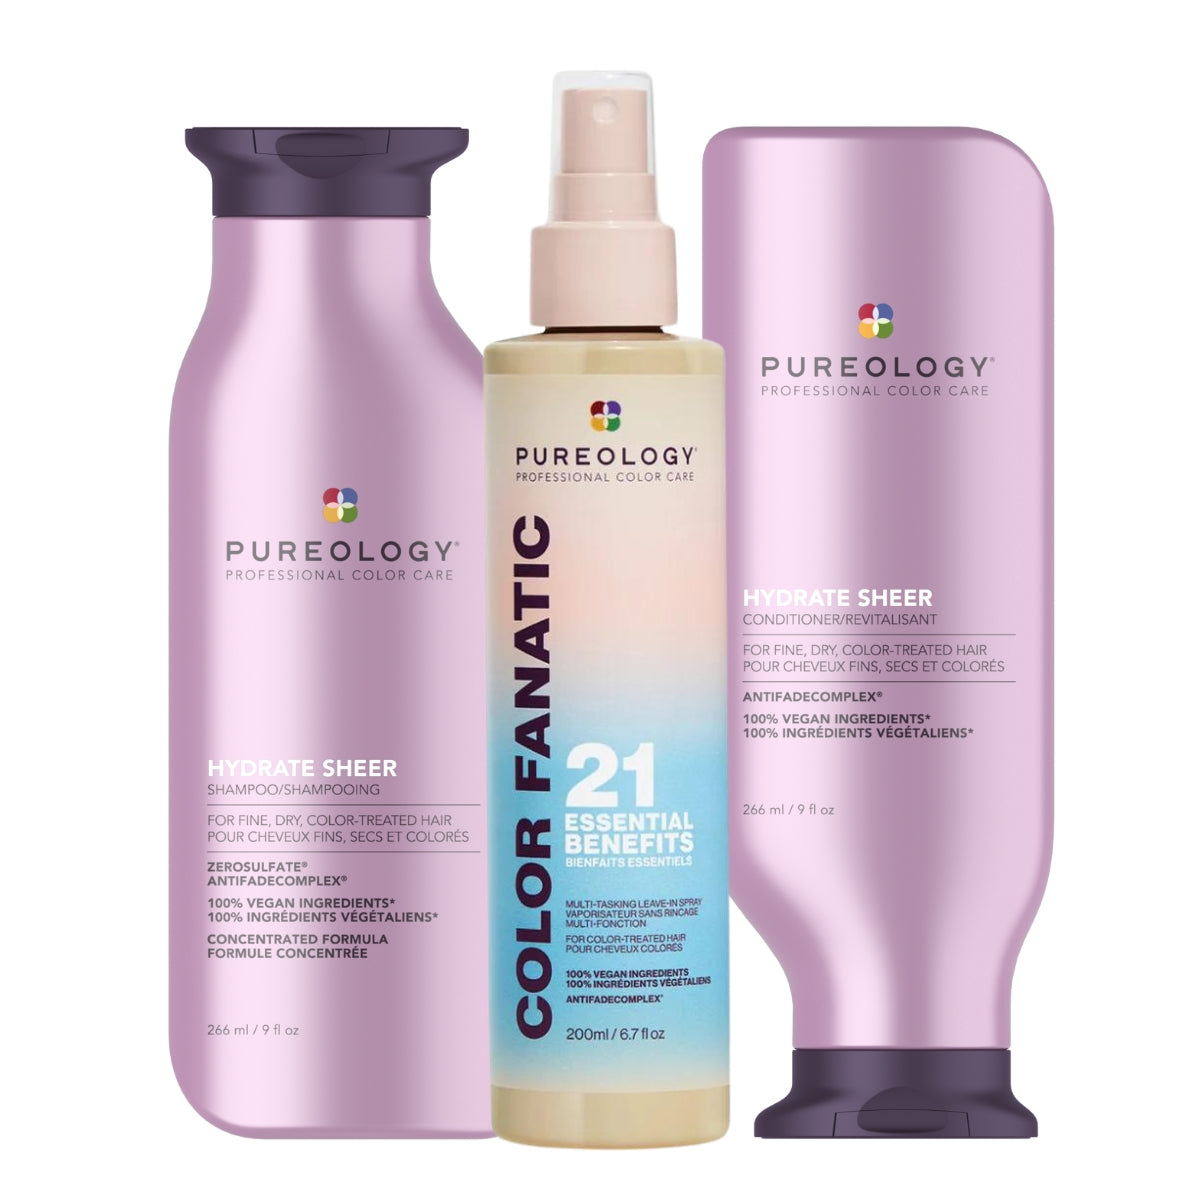 Pureology Hydrate Sheer Shampoo, Conditioner and Color Fanatic Leave In Conditioner Bundle For Fine, Dry Hair, Vegan Formulas